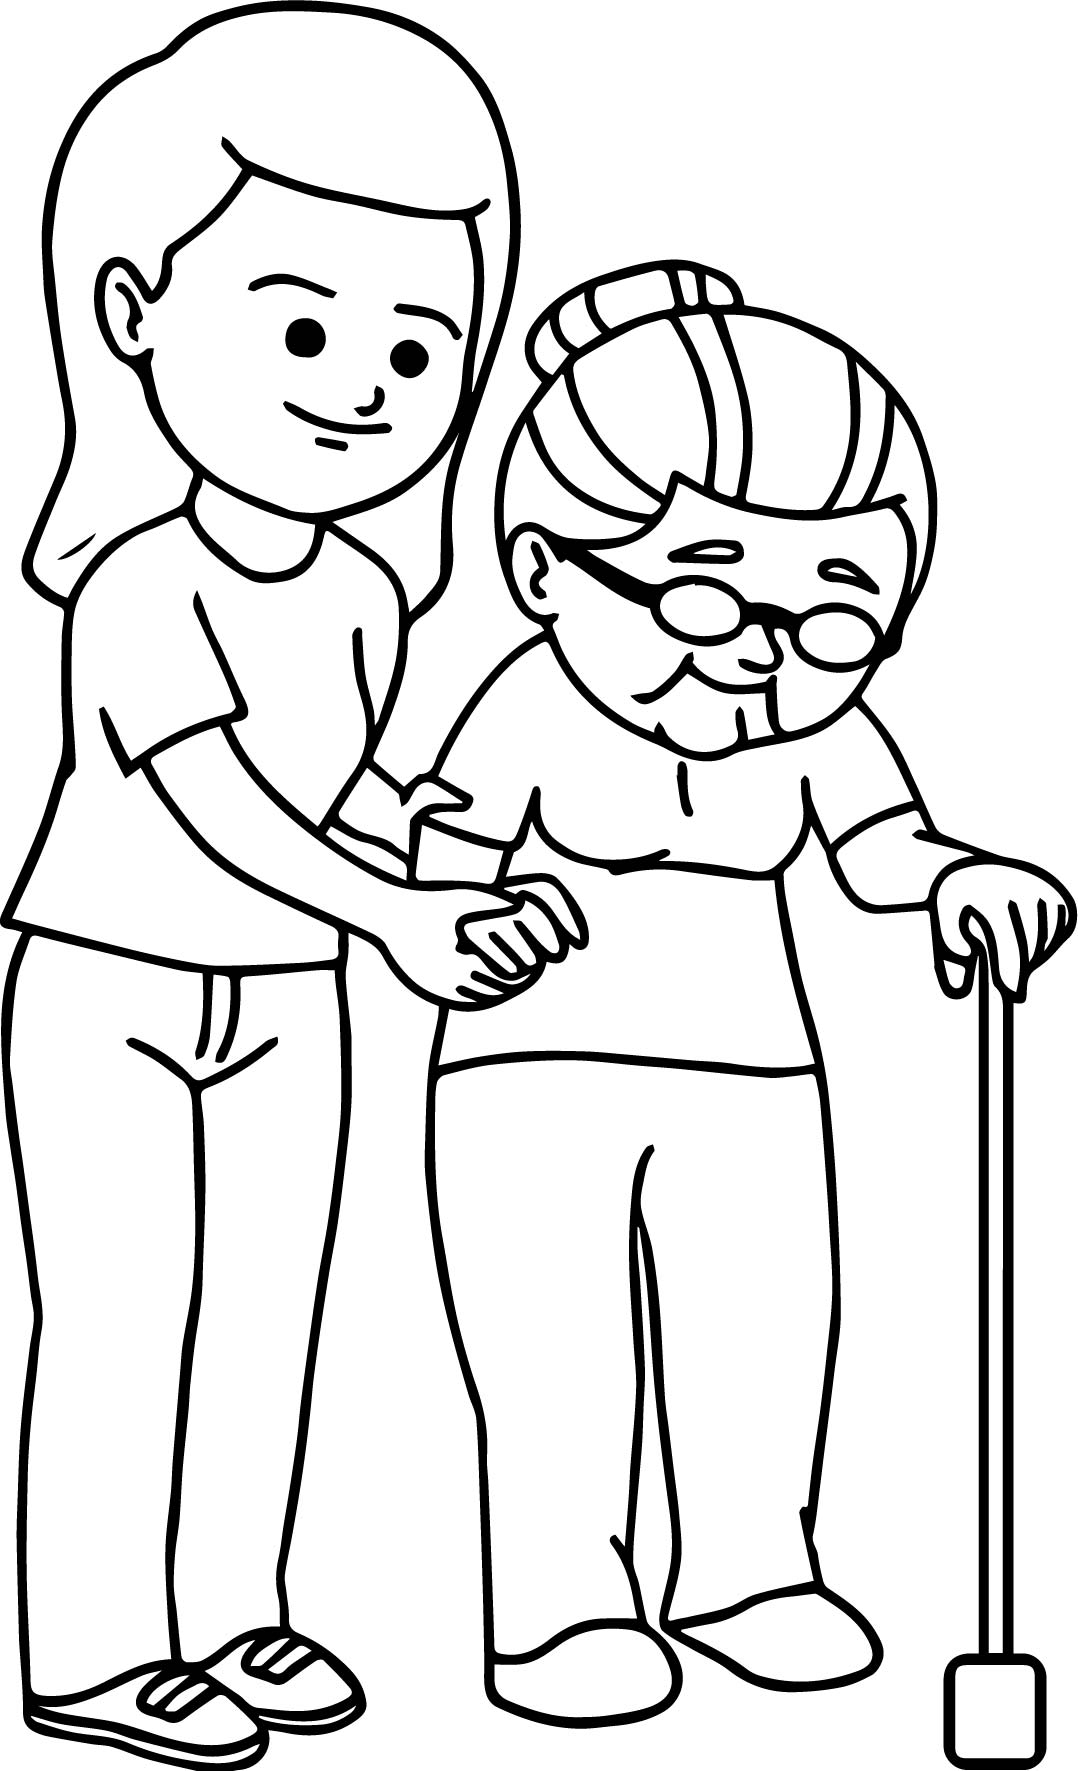 Woman Helping Elderly Woman To Walk Family Coloring Page